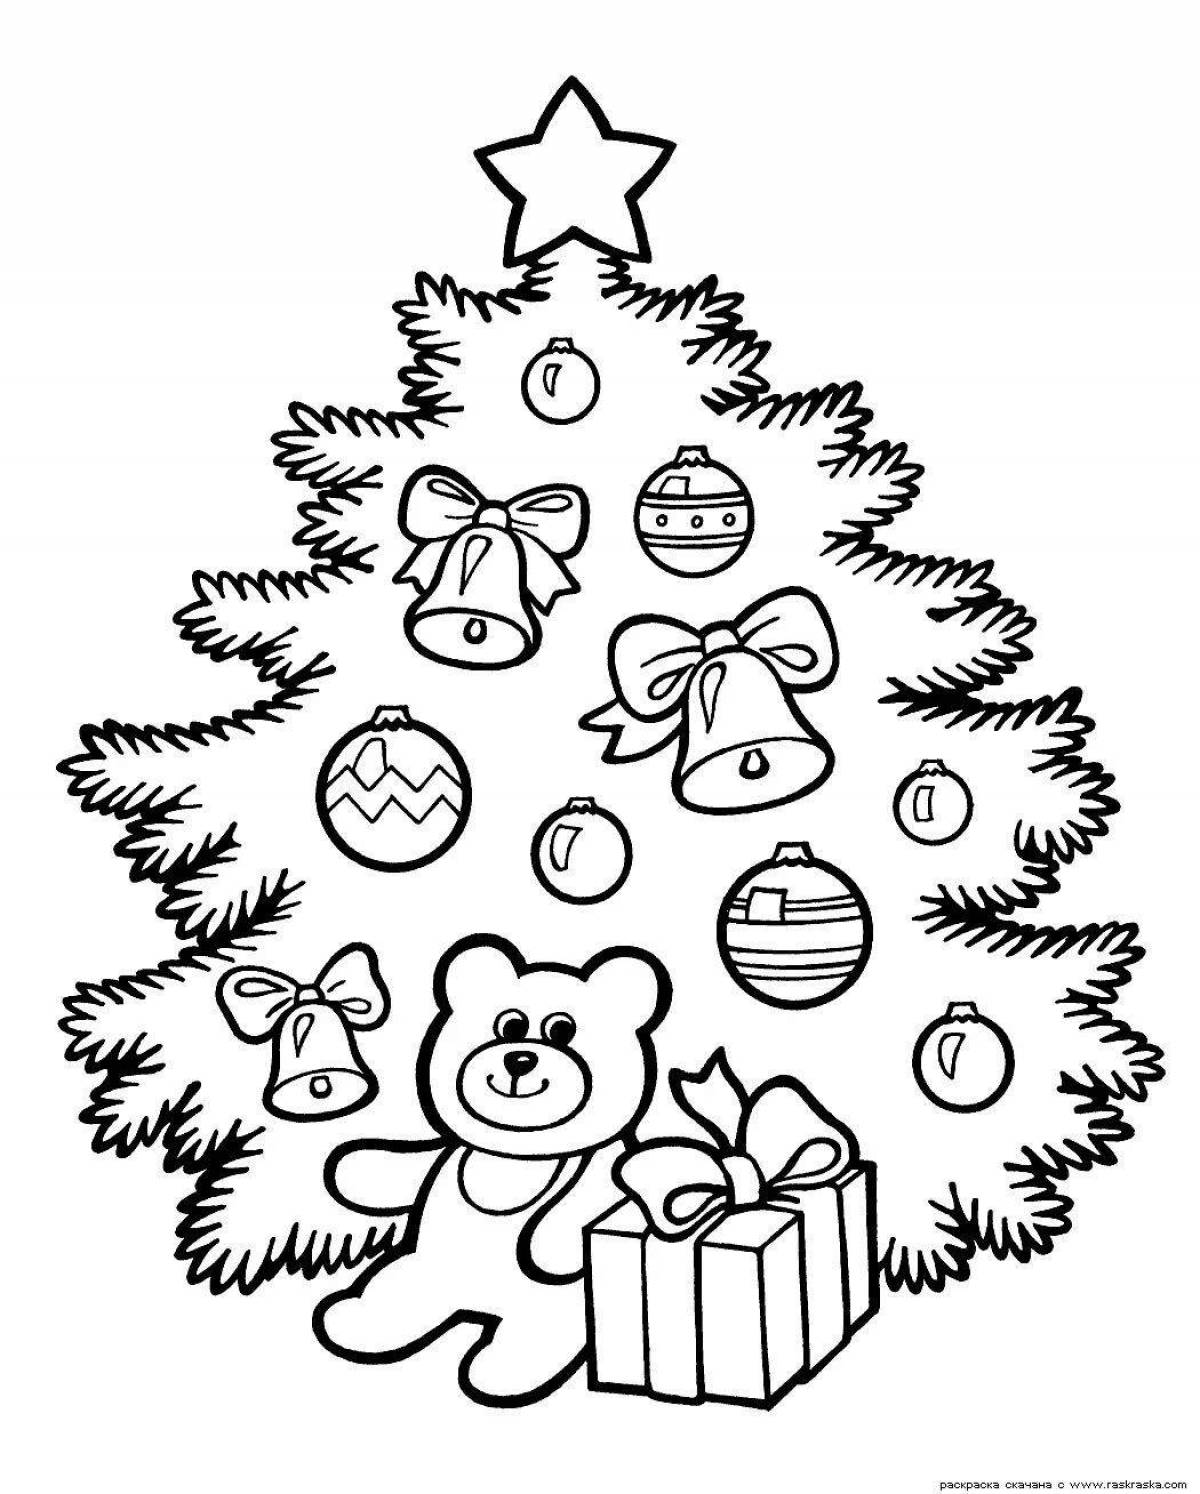 Ornate Christmas tree coloring page